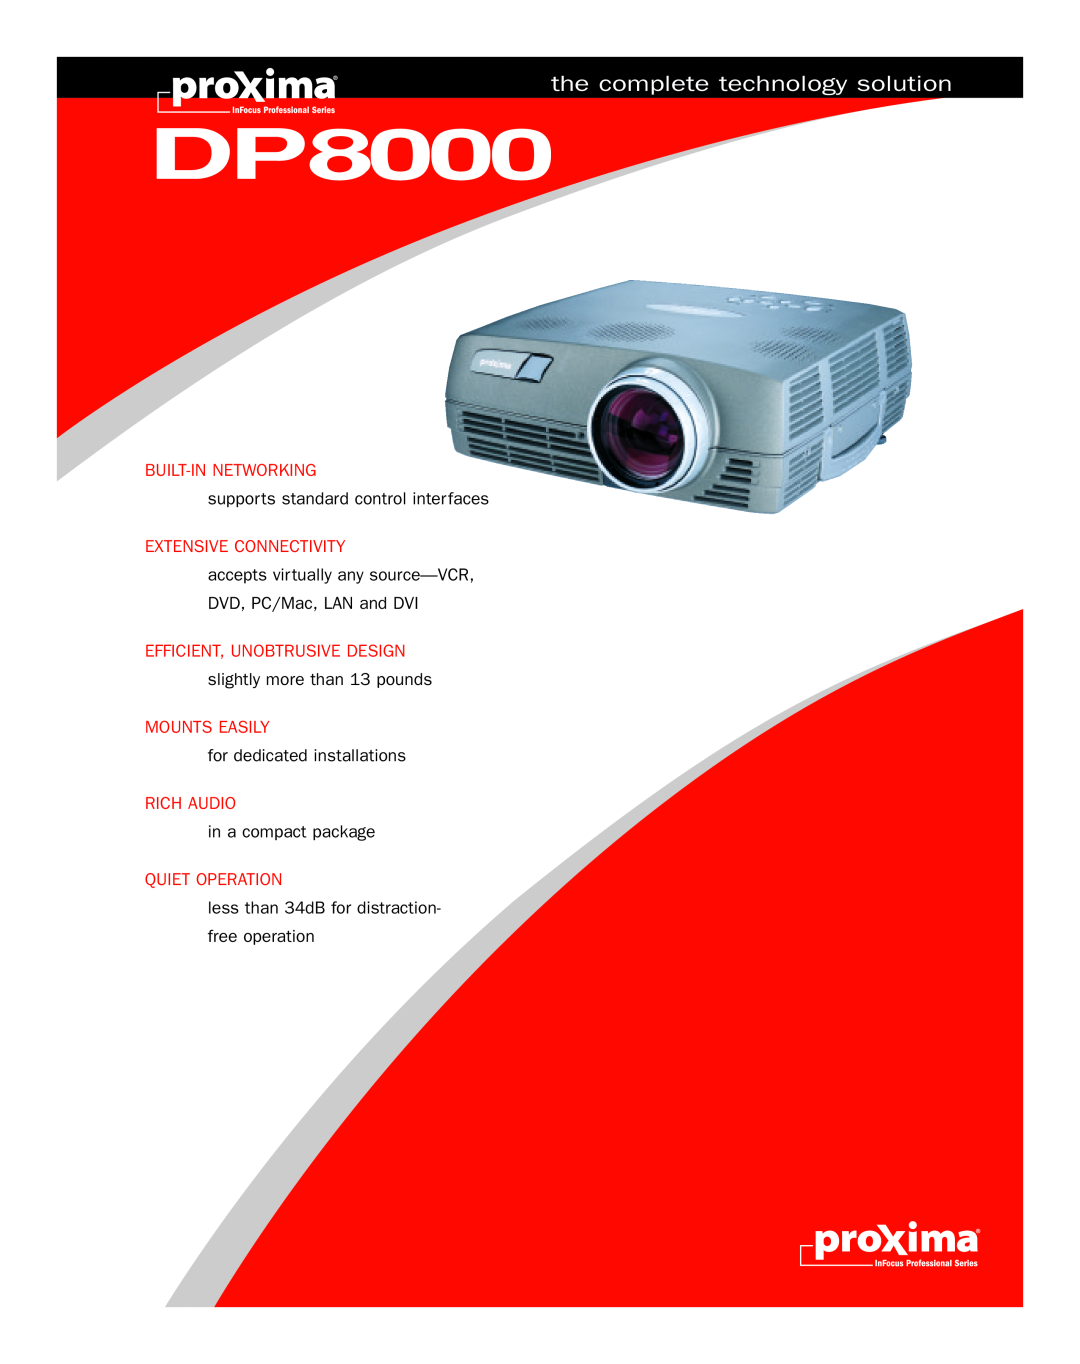 InFocus DP8000 manual Built-In Networking, Extensive Connectivity, Mounts Easily, Rich Audio, Quiet Operation, Ask Logo 